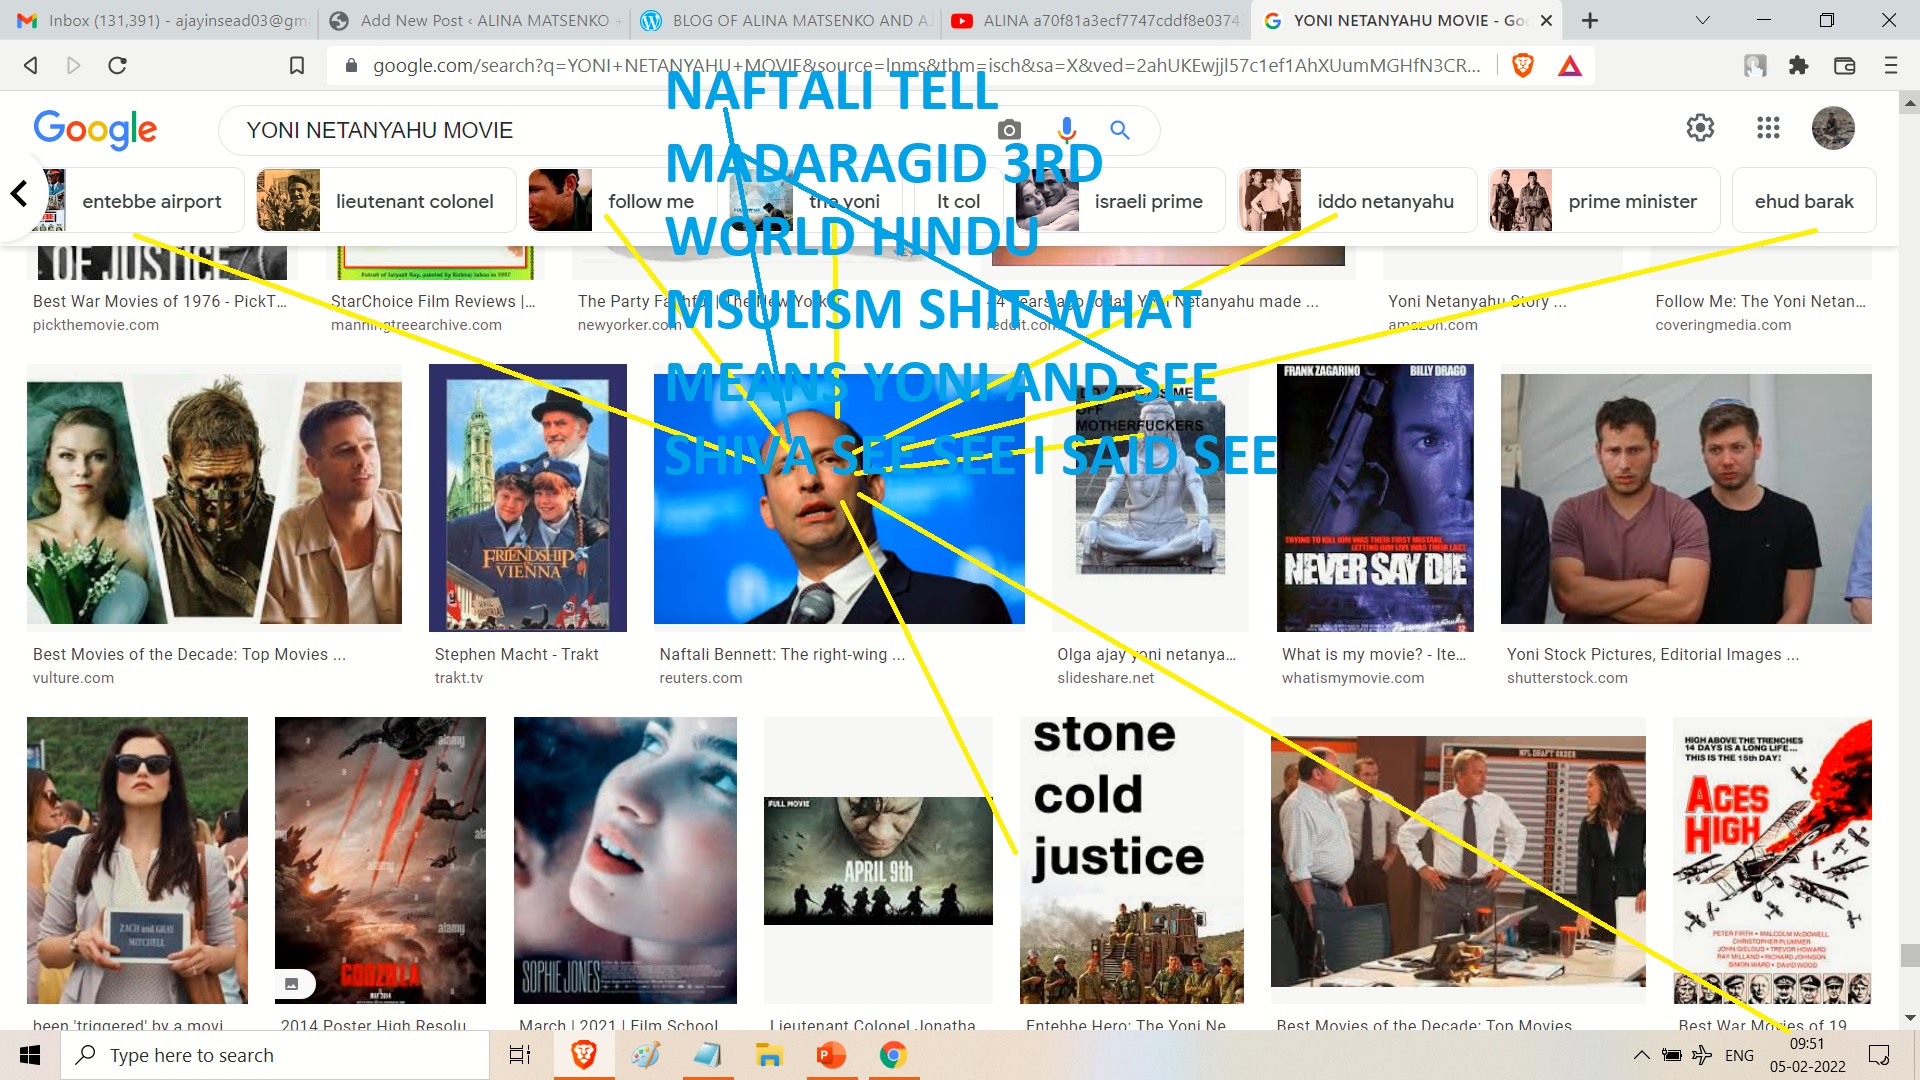 YONI NETANYAHU MOVIE --TO NAFTALI BENETTENATALIA VADIANO AND LOUIS VOUTTON AND LVHM AND KHANS - OF BOLLYWOD WHIORES IF KHANS THEN BIMBS IN YOUR BEDROOM TO